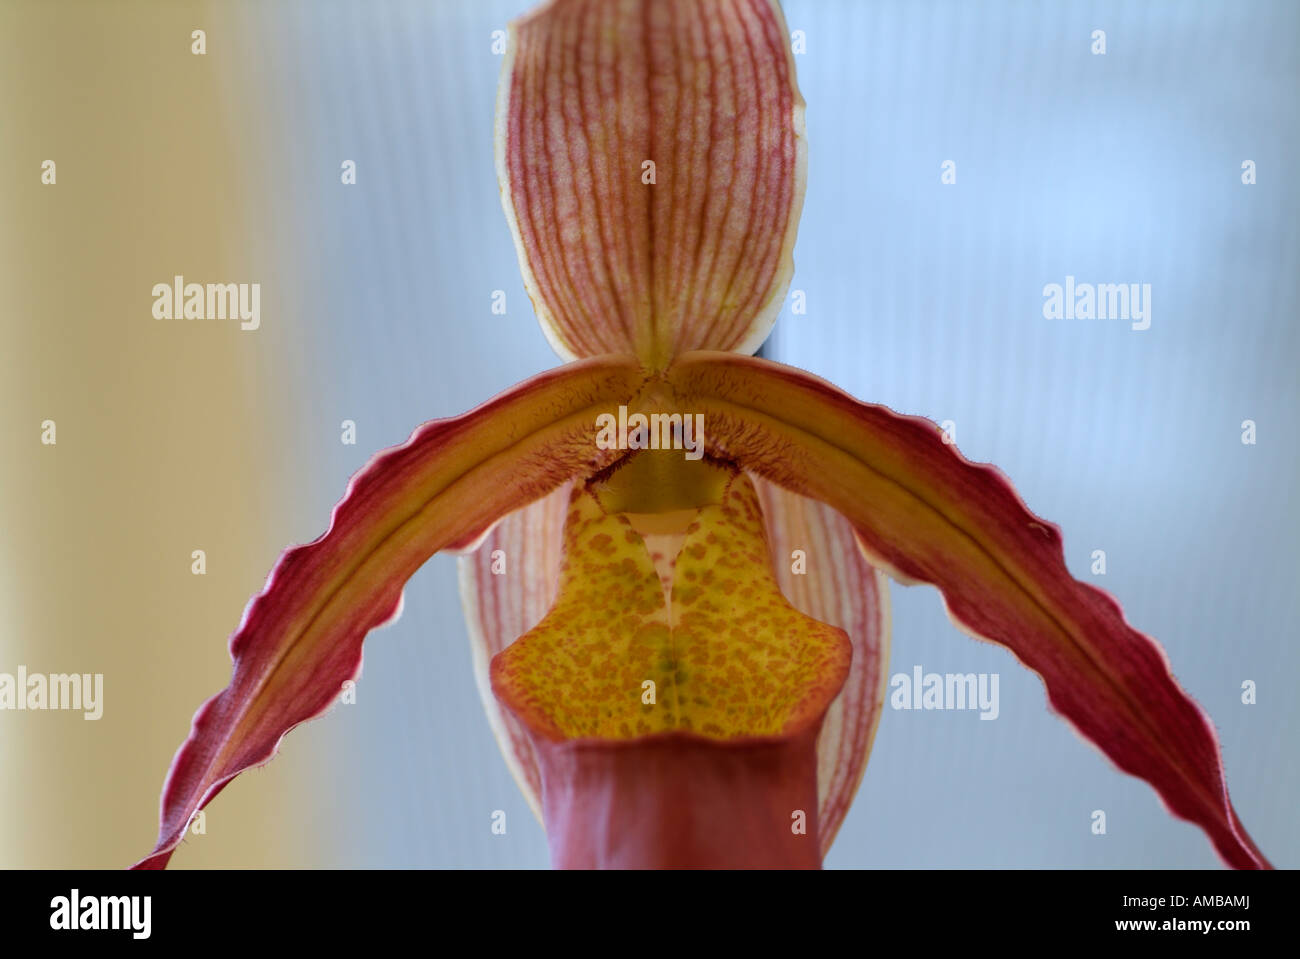 frontal closeup of Paphiopedilum insigne lady slipper orchid Stock Photo